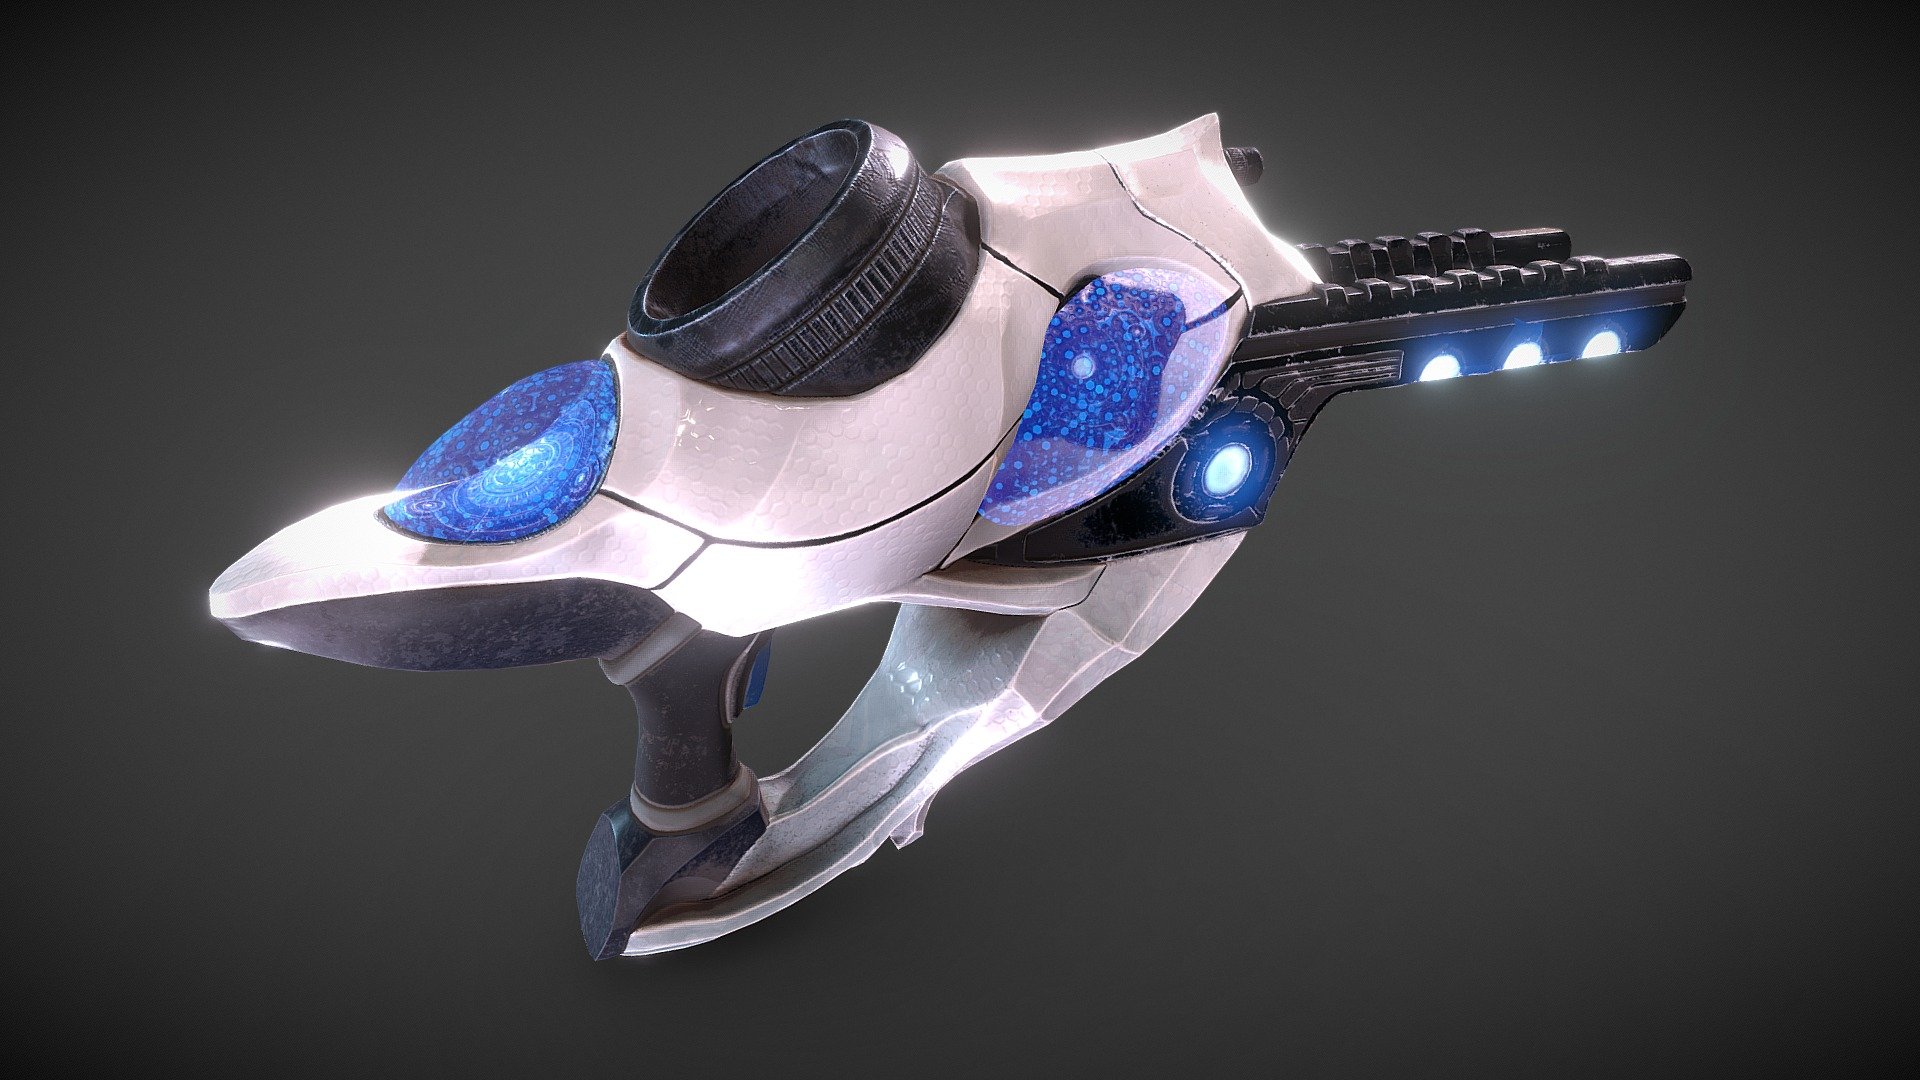 Another part of the SciFi weapon series I’m working on. This pistol has the same specifications as the other weapons in the set and can be used in games or other realtime projects. Full PBR texture set included 3d model